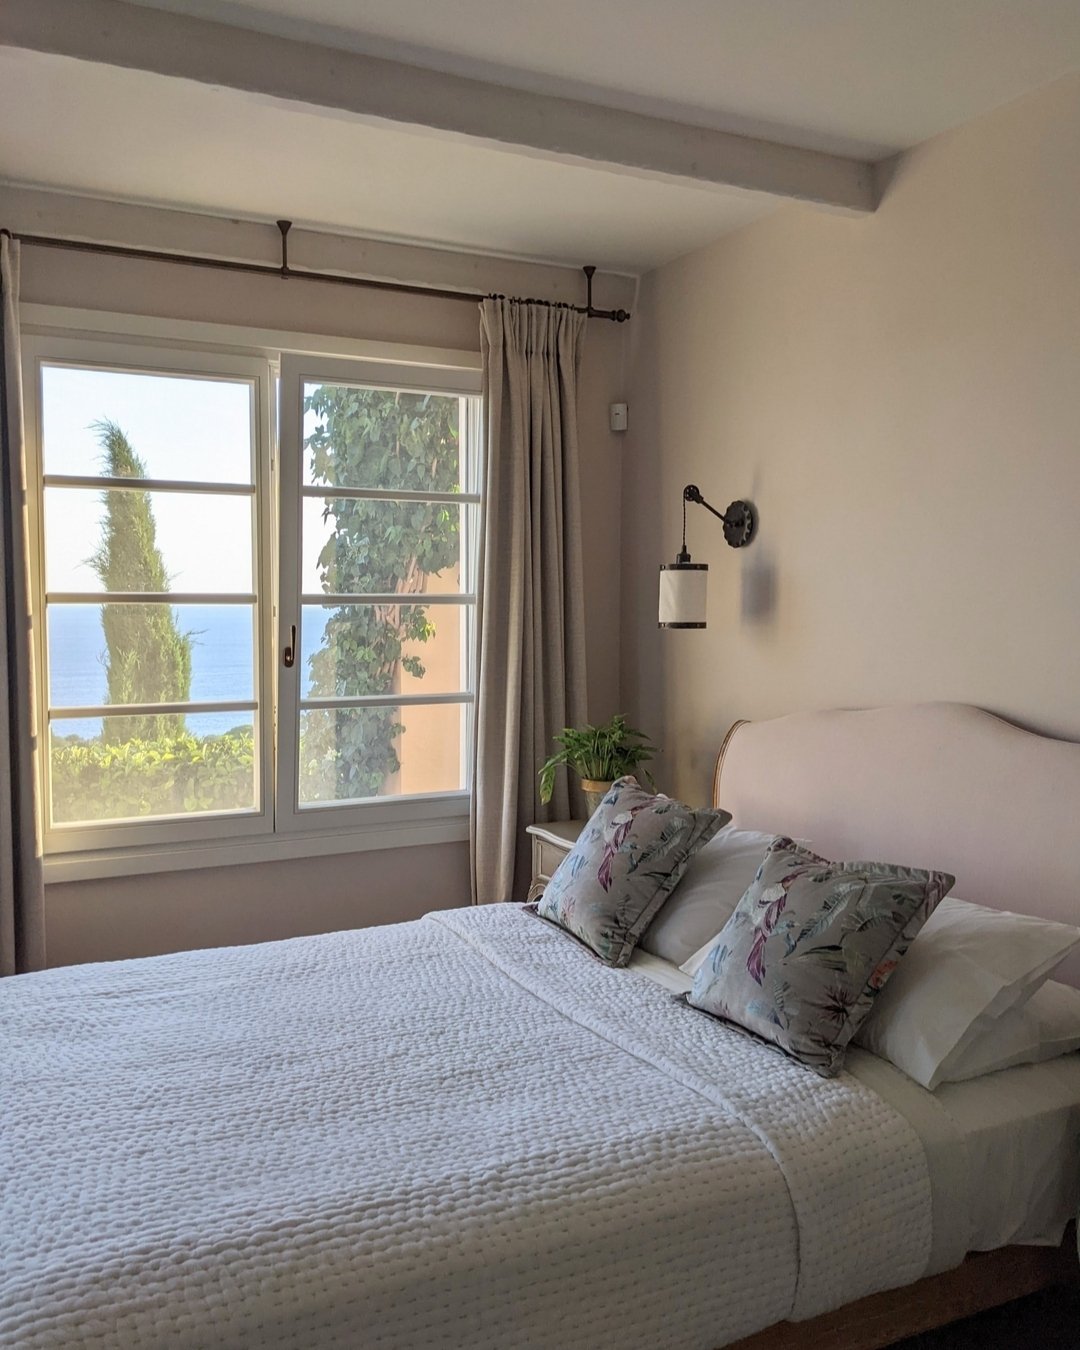 One of the tranquil guestrooms of the KSD Greek Villa project